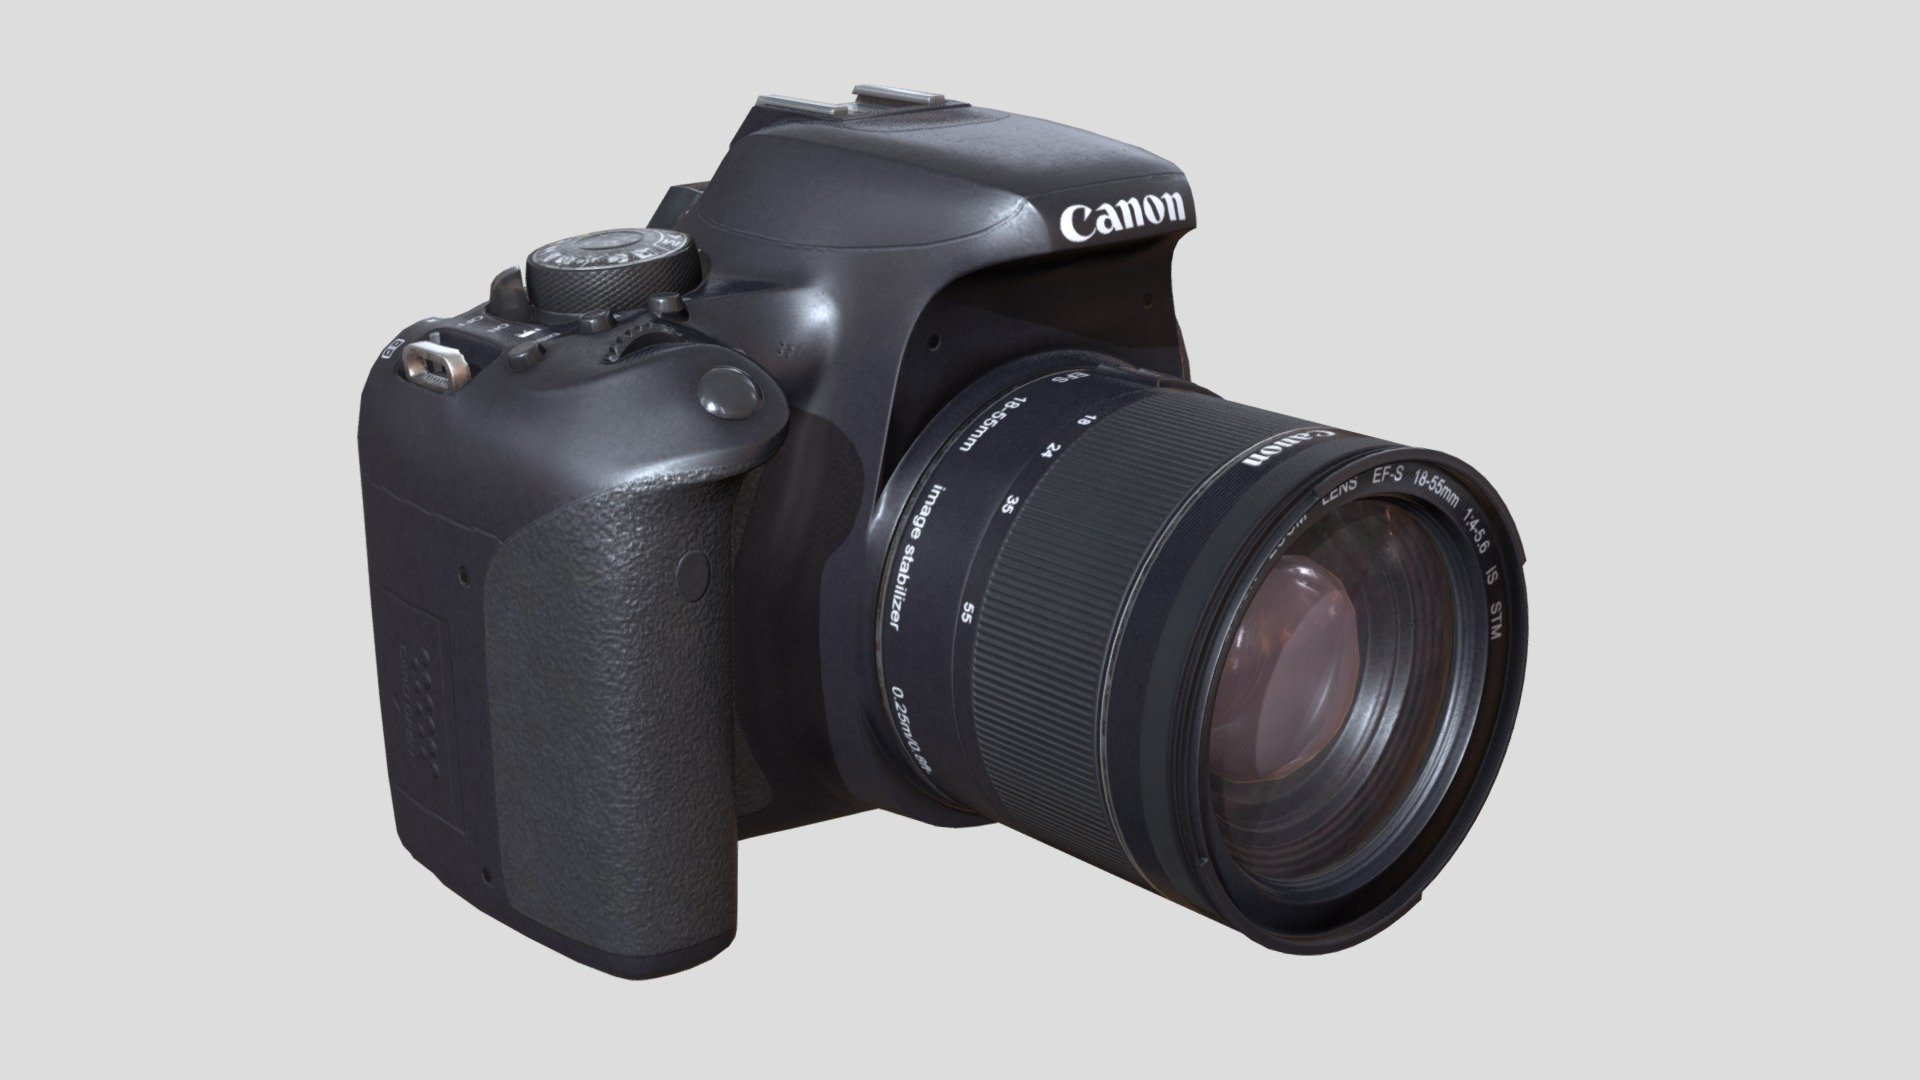 Canon T7i 800D DSLR Camera PBR is an optimized model with excellent texturing for best outcome.

The model has an optimized low poly mesh with the greatest possible number of simplifications that do not affect photo-realism but can help to simplify it, thus lightening your scene and allowing for using this model in real-time 3d applications.

In this product, all objects are ERROR-FREE. All LEGAL Geometry. Subdivisions are not required for this product. Real-world accurate model.


Format Type



3ds Max 2017 (Default Physical PBR Shader)

FBX

OBJ

3DS


Texture Type



Albedo

Metalness

Roughness

Normal

Alpha

AO

You might need to re-assign textures map to model in your relevant software

You might need to flip green channel of Normal map according to your relevant softwar - Canon T7i 800D DSLR Camera PBR - Buy Royalty Free 3D model by luxe3dworld 3d model